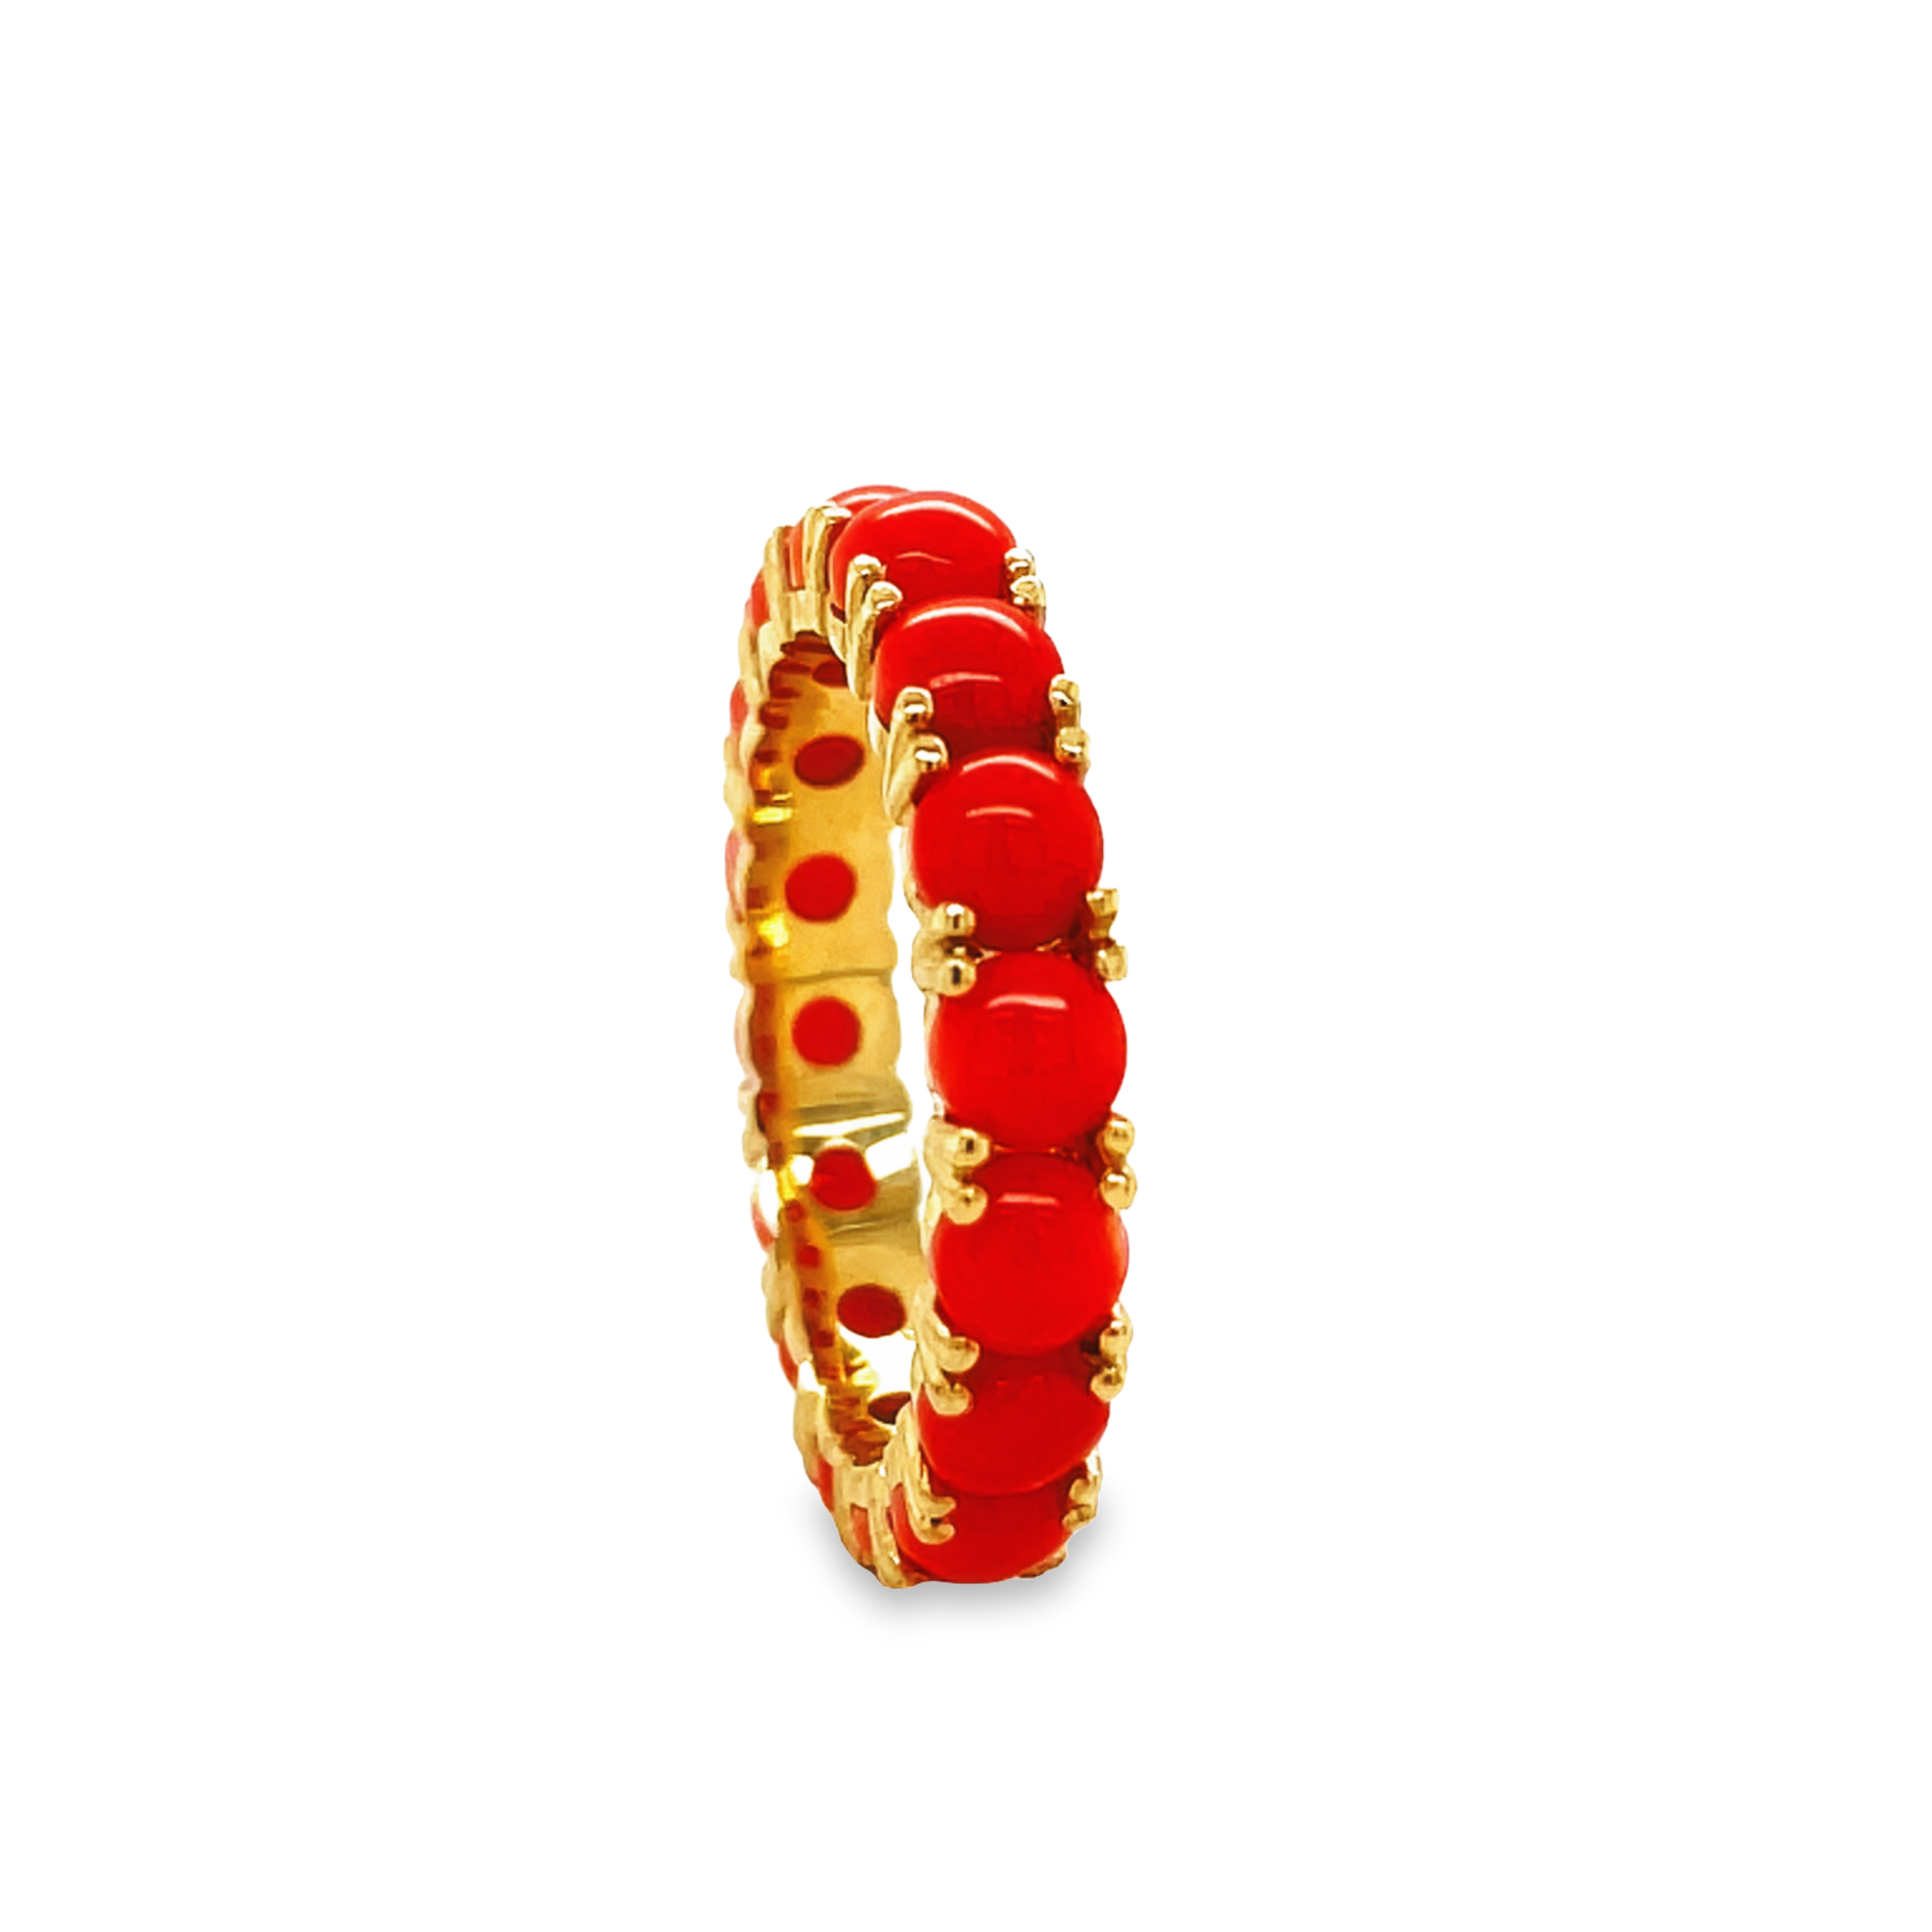 This beautiful coral bead ring is crafted in 14k yellow gold and is 4.00 mm wide. With an easy to stack design, it is perfect for any occasion. Size 8.